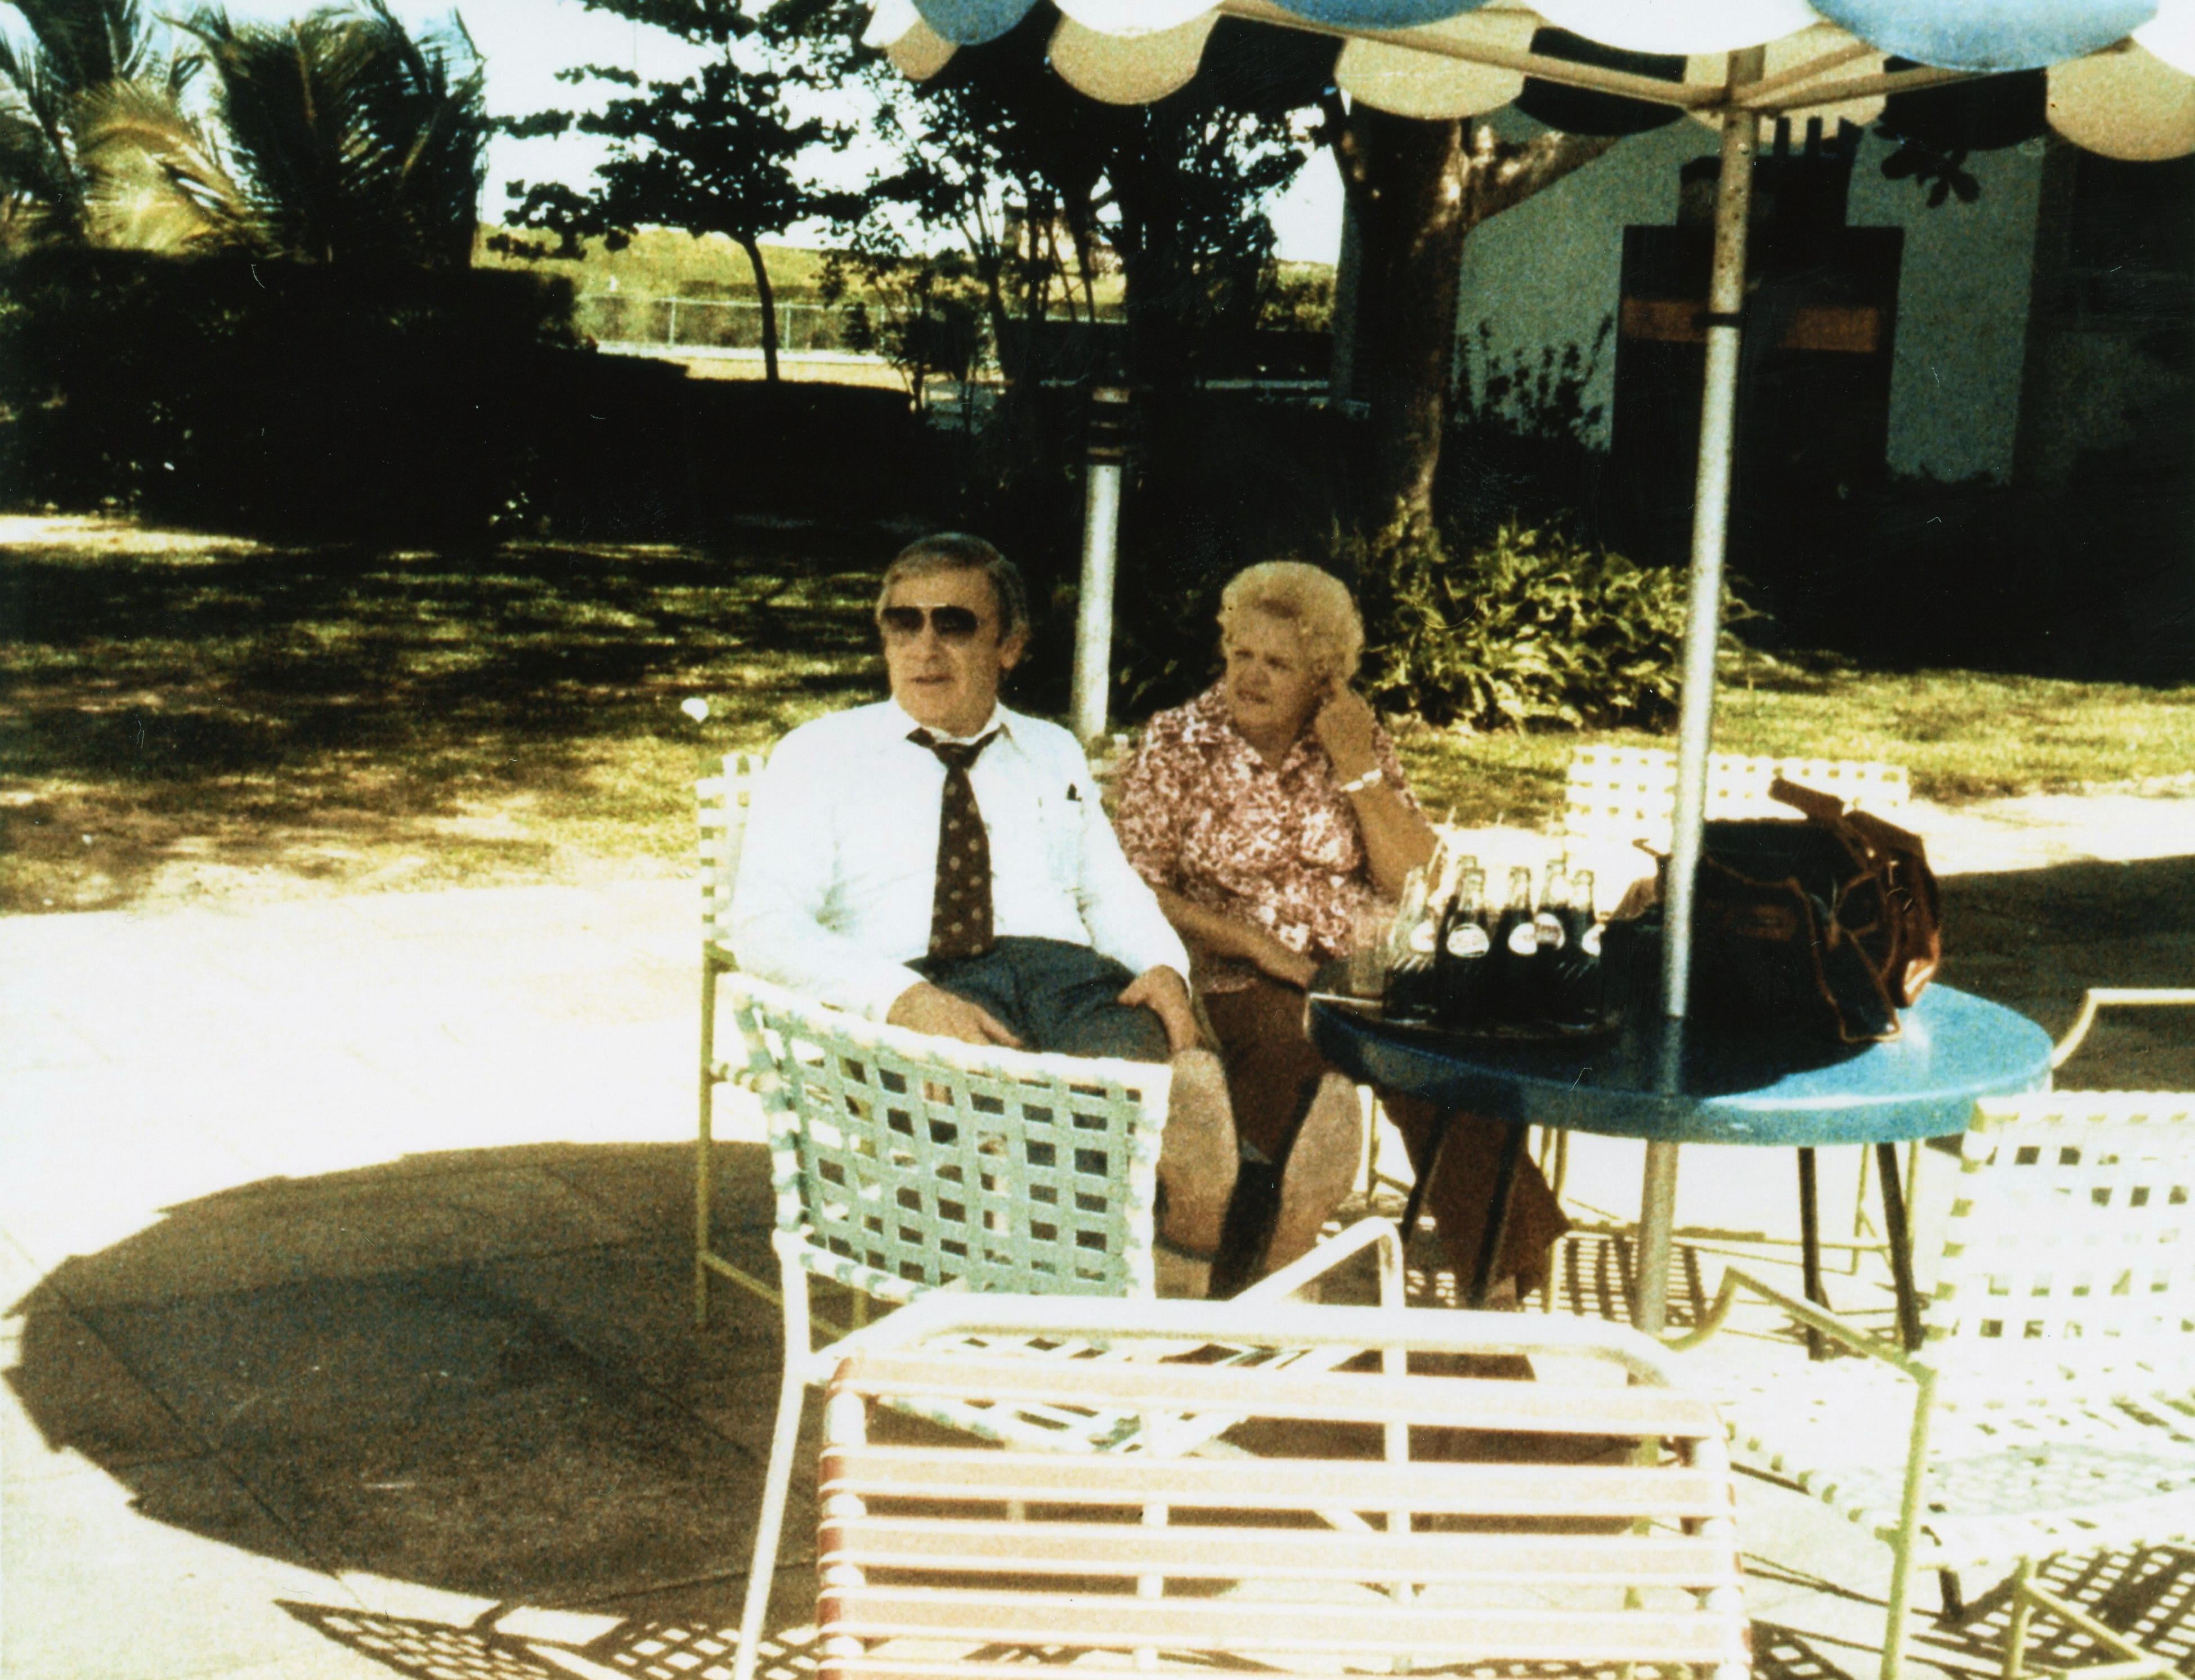  REP. RYAN with unknown woman (The Jonestown Institute)